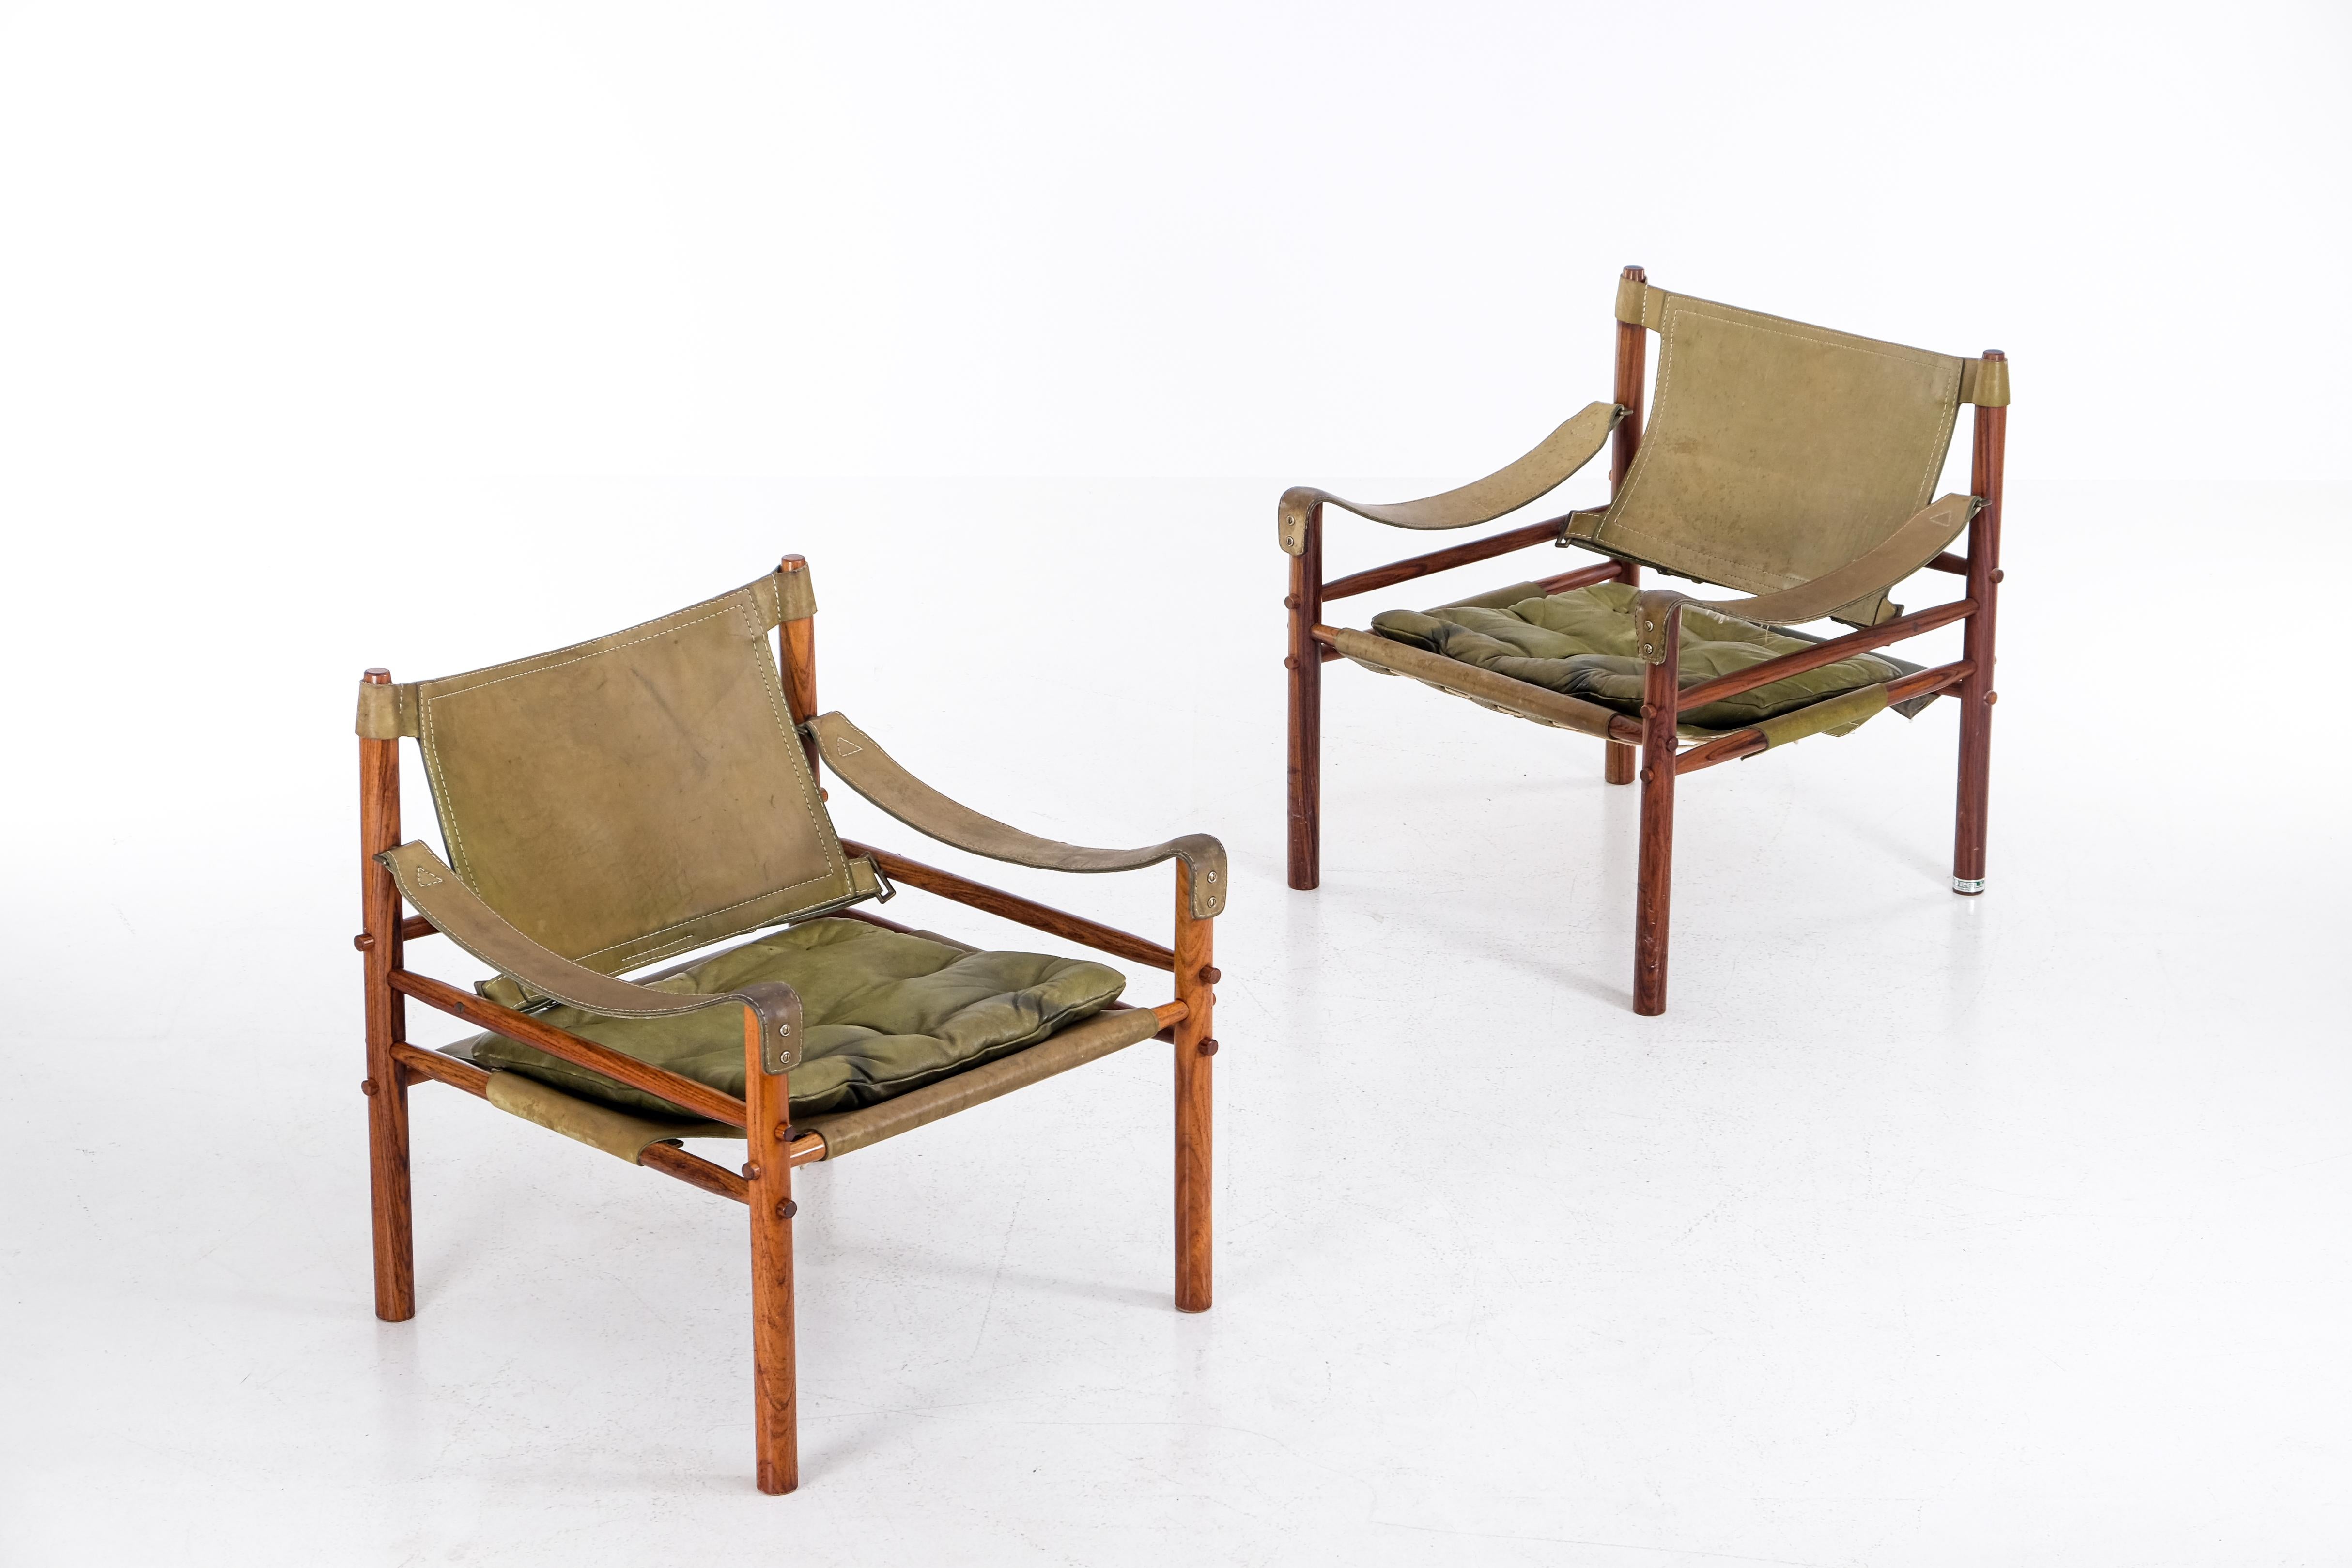 Pair of safari chairs model Sirocco in good condition with original green leather.
Designed by Arne Norell, produced by Arne Norell AB in Aneby, Sweden, 1970s.



